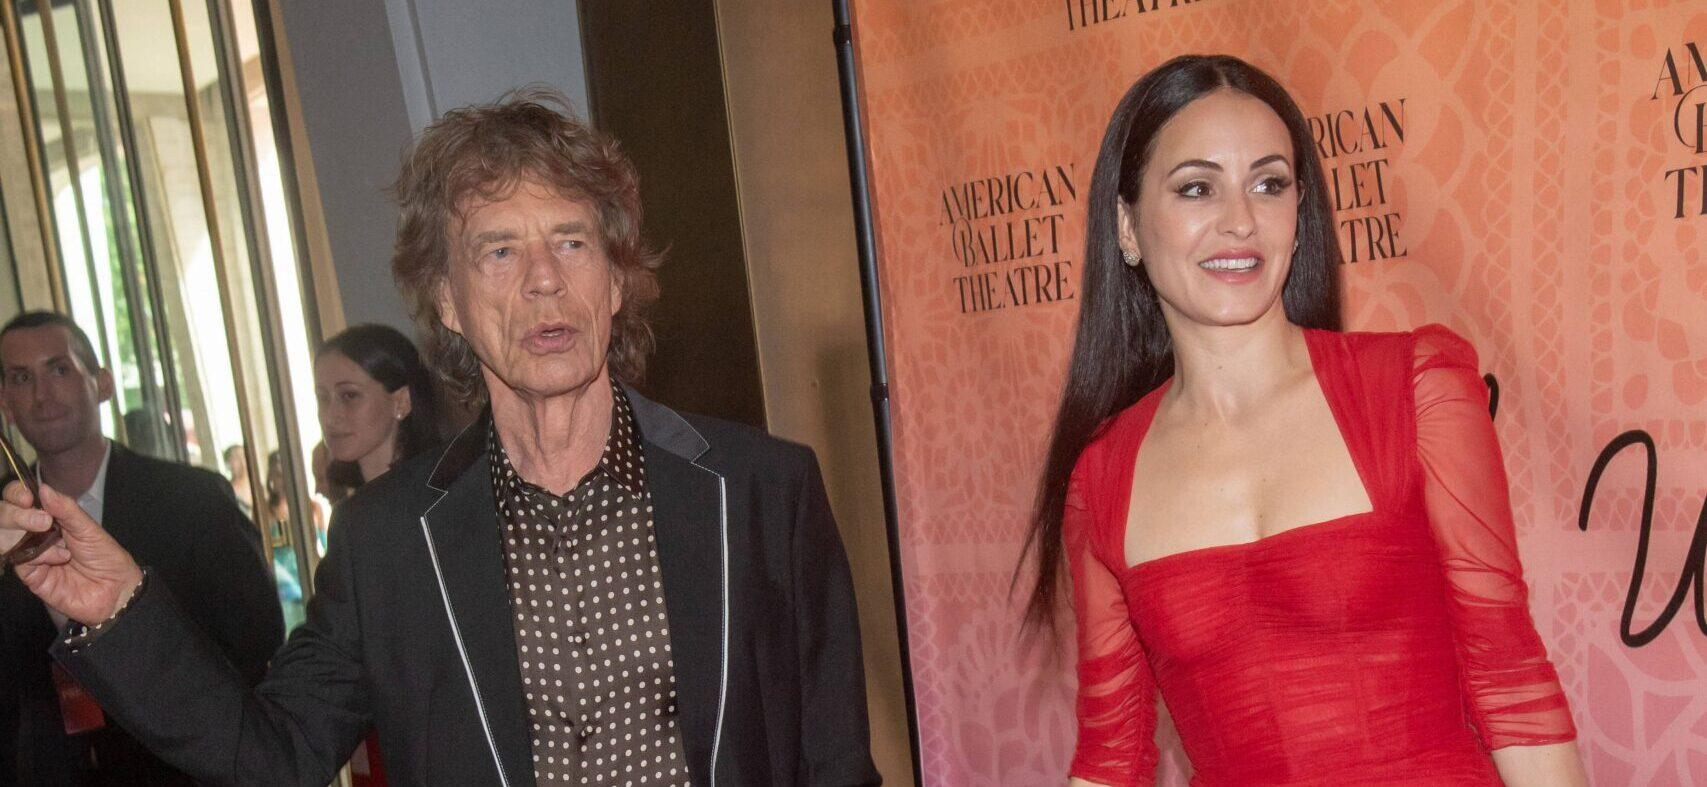 Mick Jagger Is Reportedly Engaged To Girlfriend Melanie Hamrick